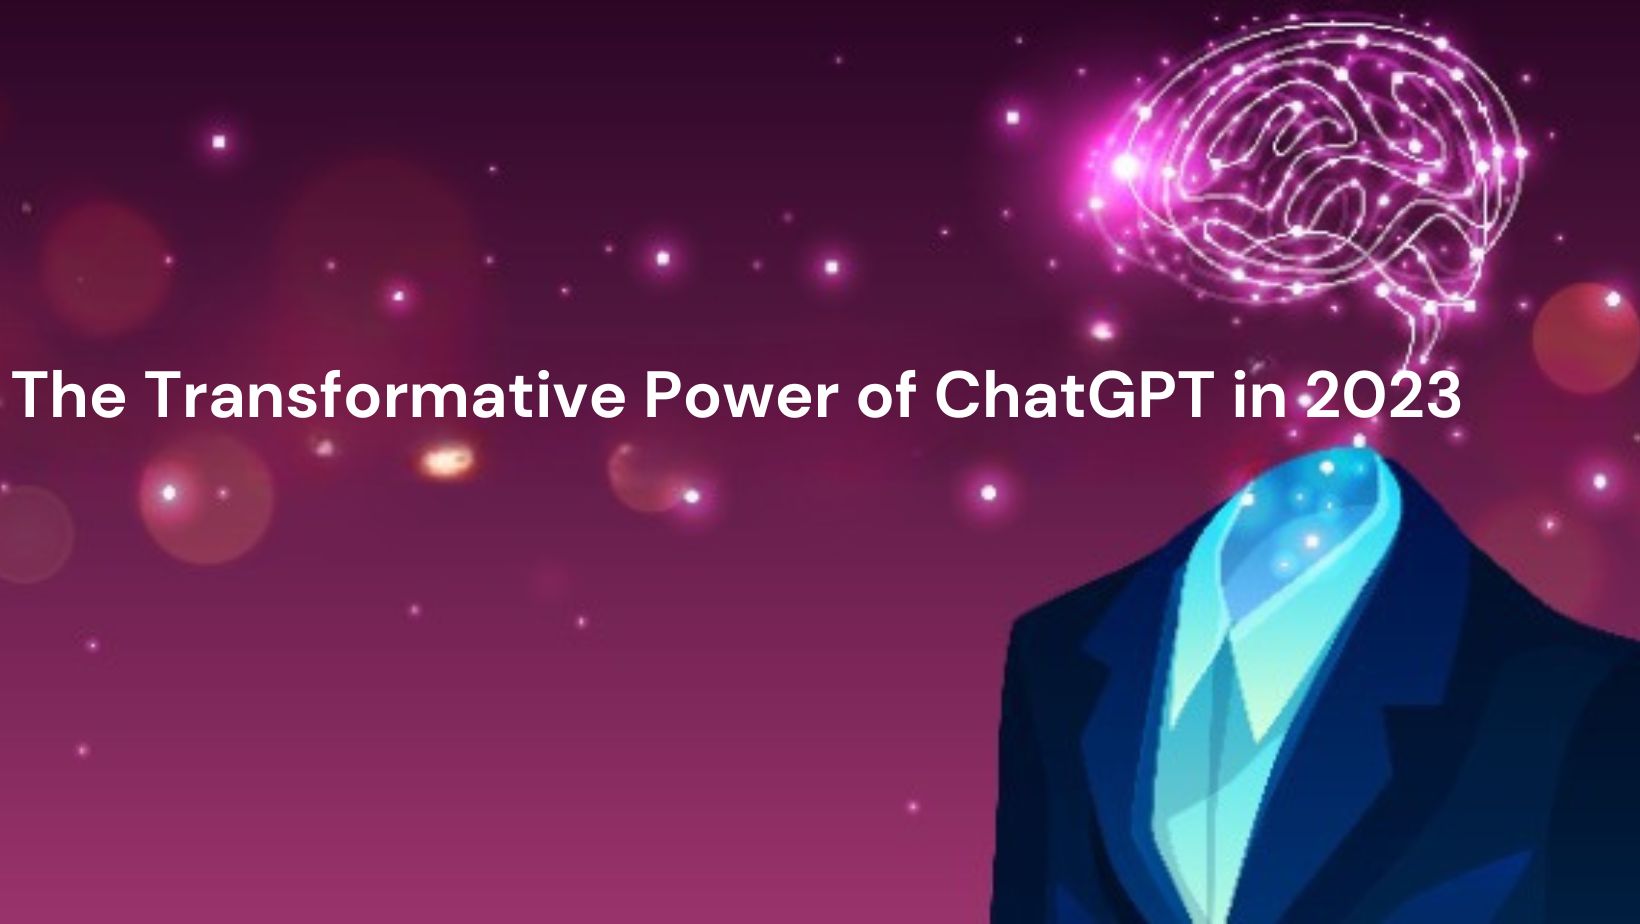 An illustration of a person using ChatGPT to create something new and revolutionary.